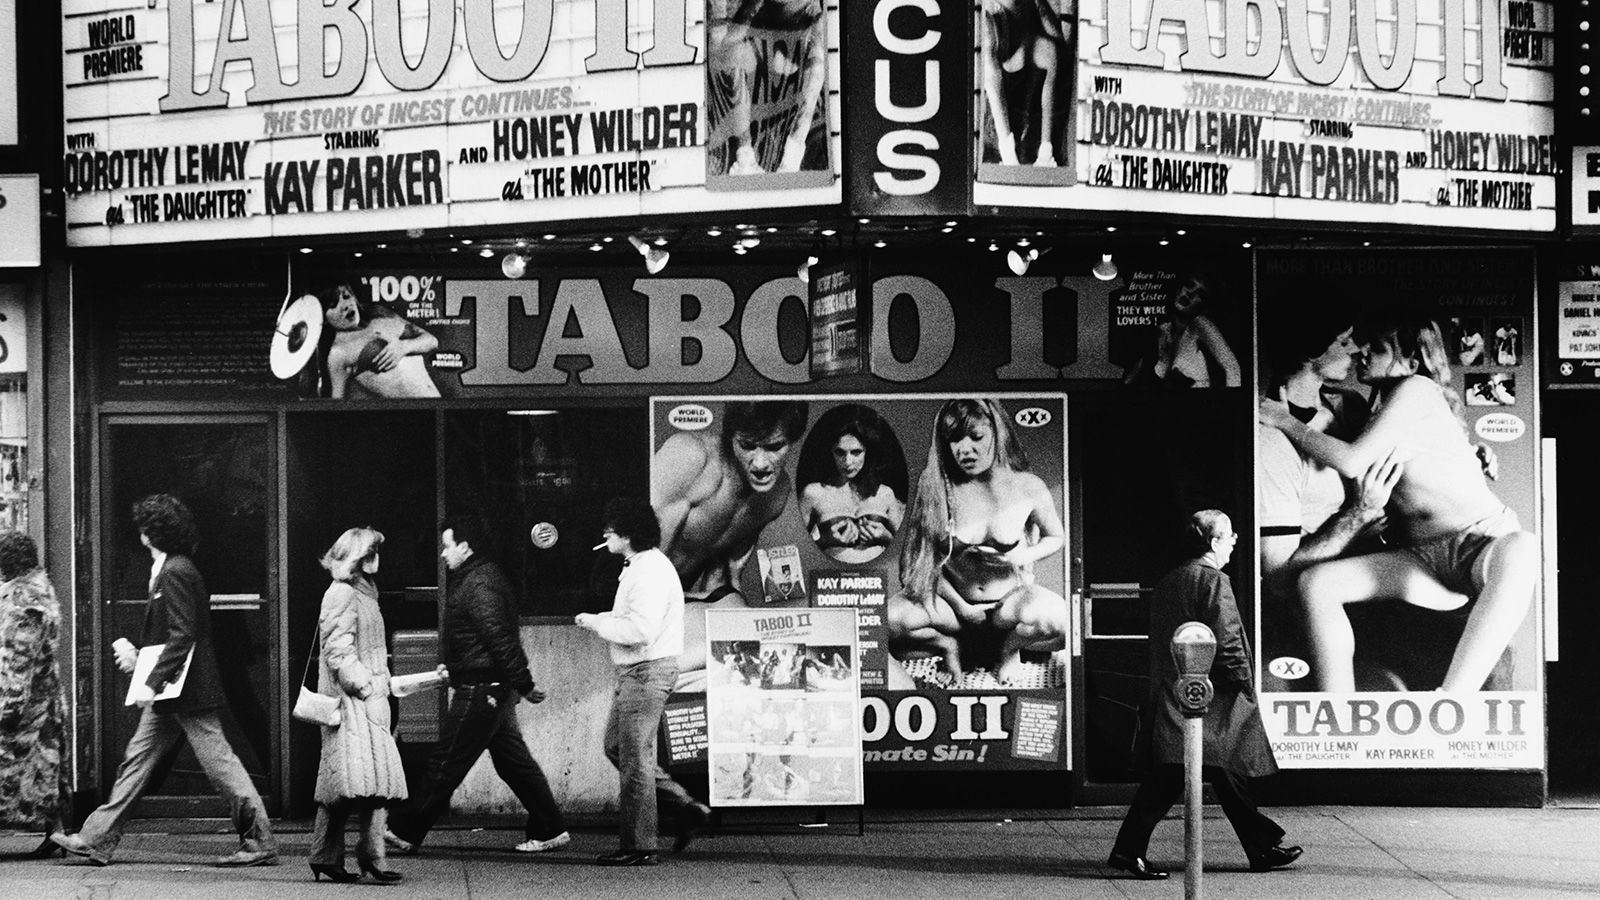 1980s Public Porn - When New York City's Times Square was sleazy | CNN